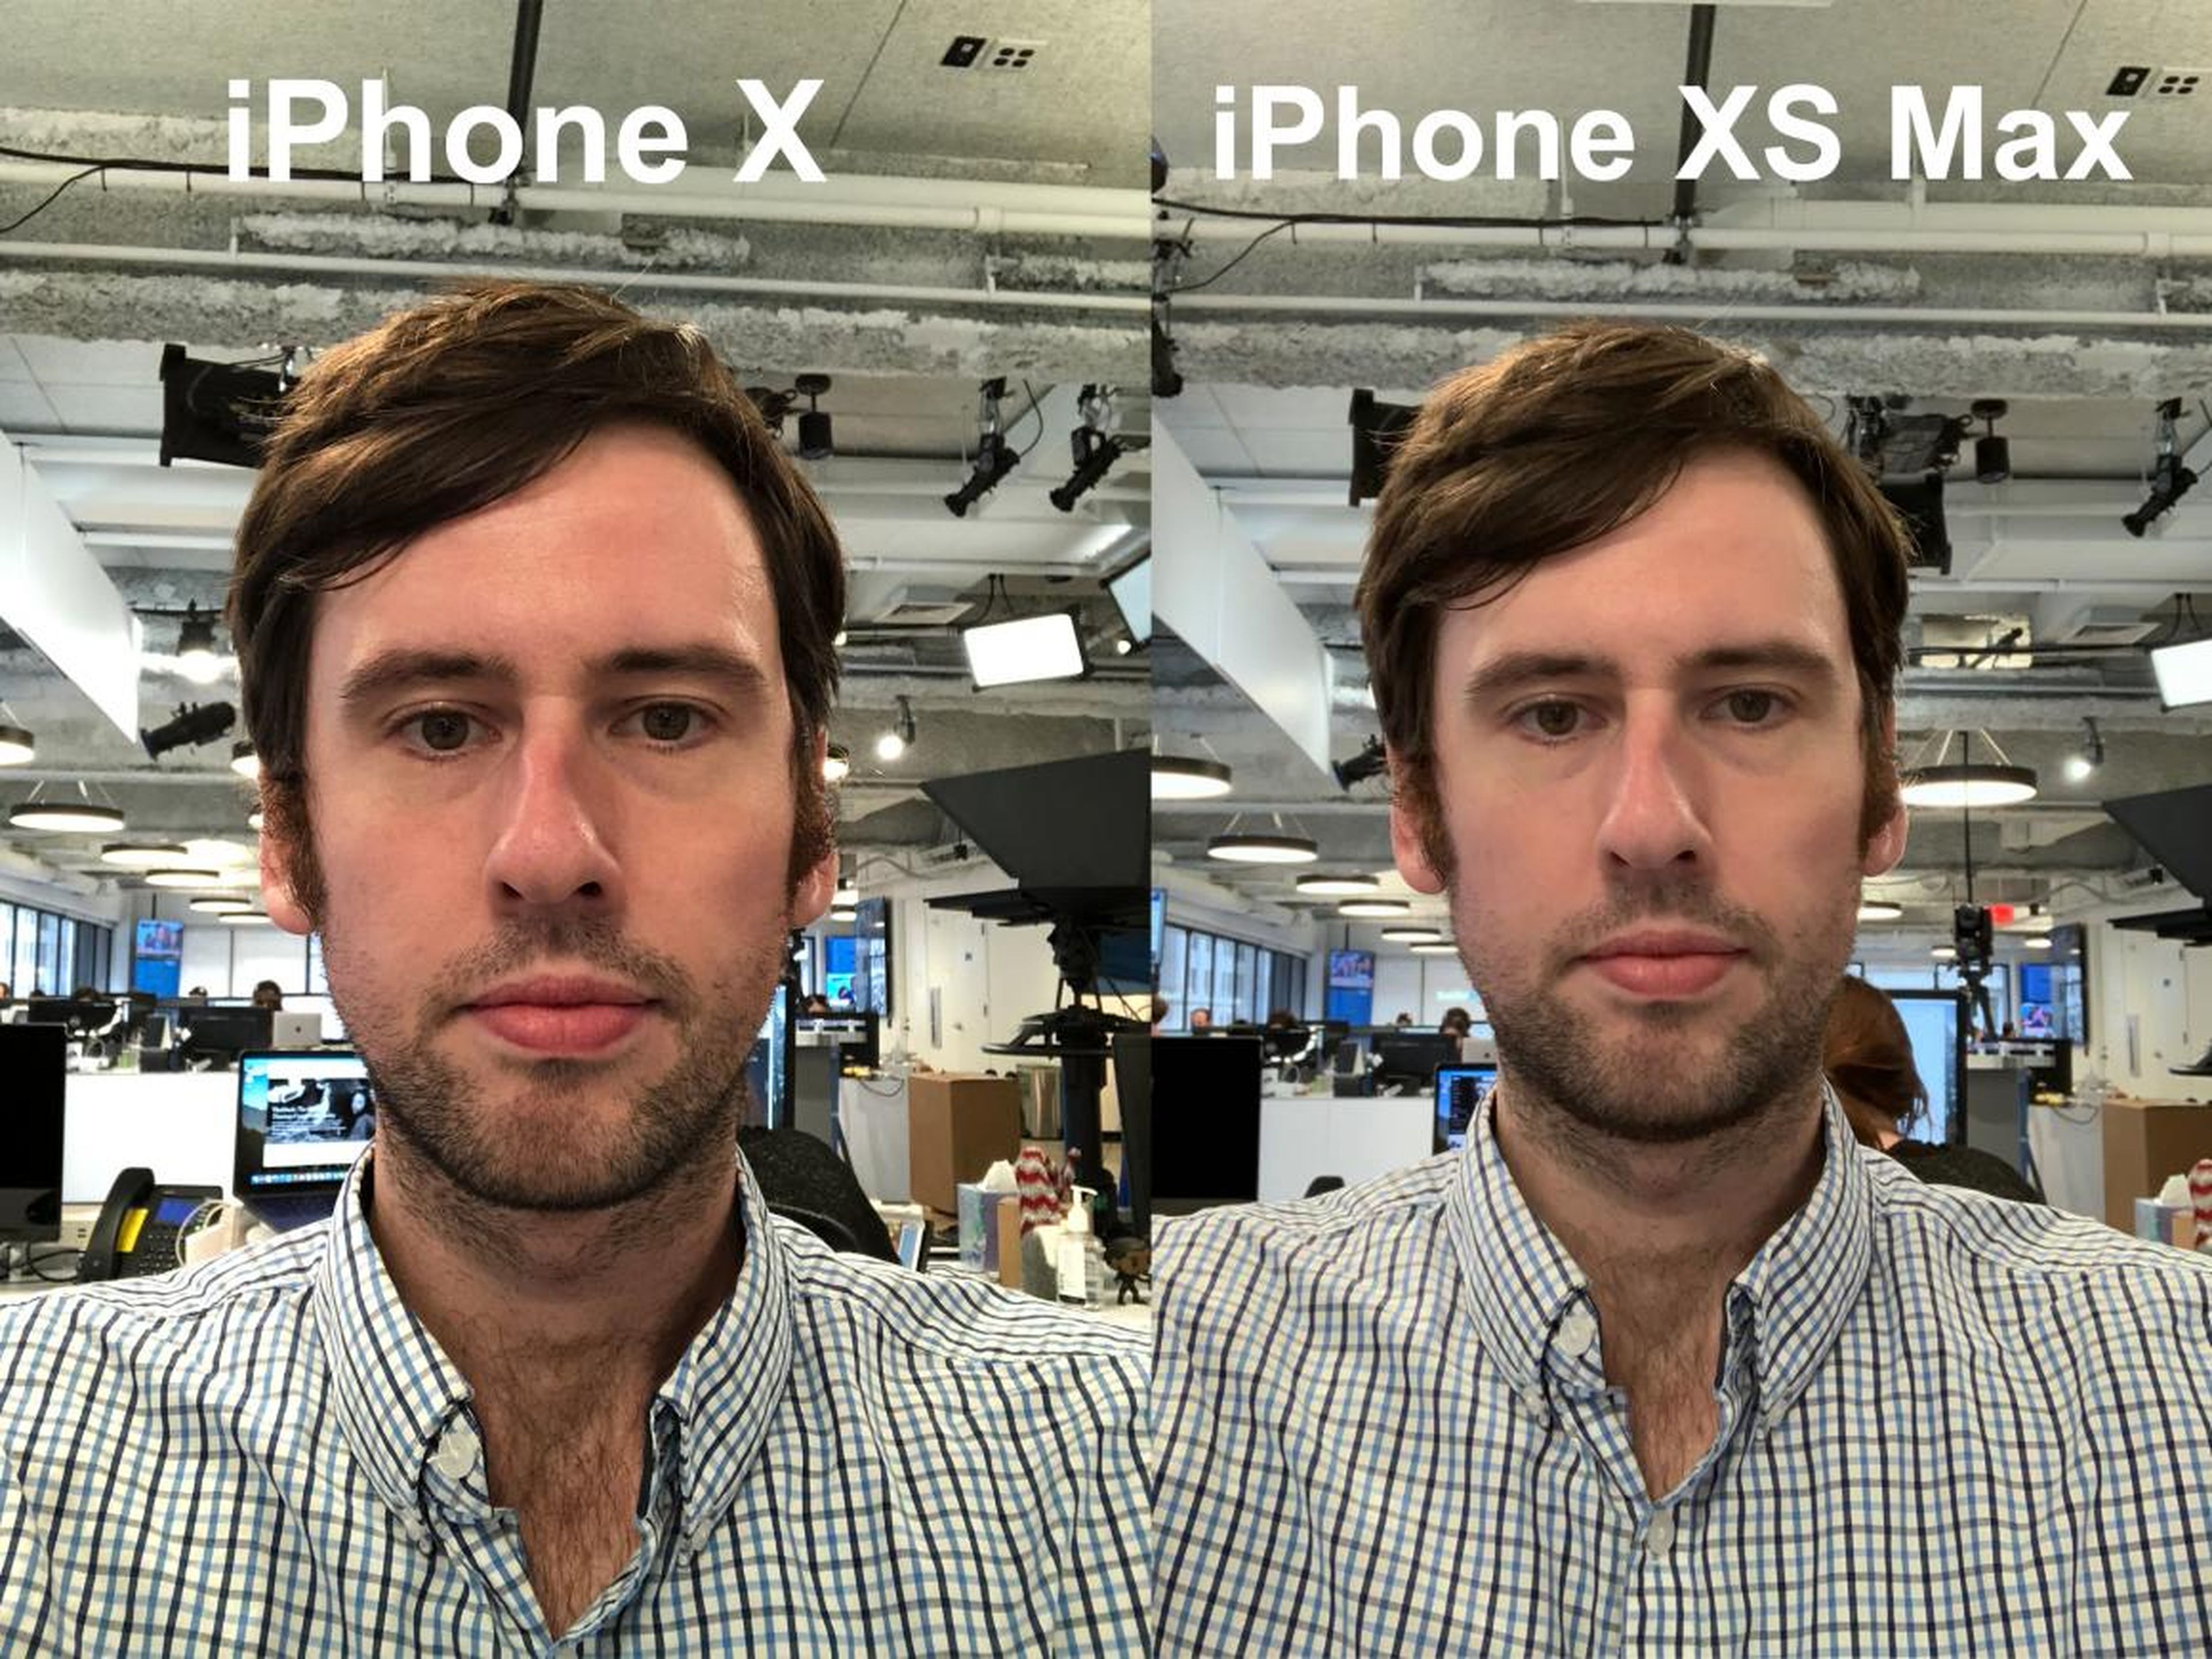 The smoothing is less pronounced here, but it's still there, especially with face sheen. The colors of my face and lips are less red and more uniform in the iPhone XS selfie, too.